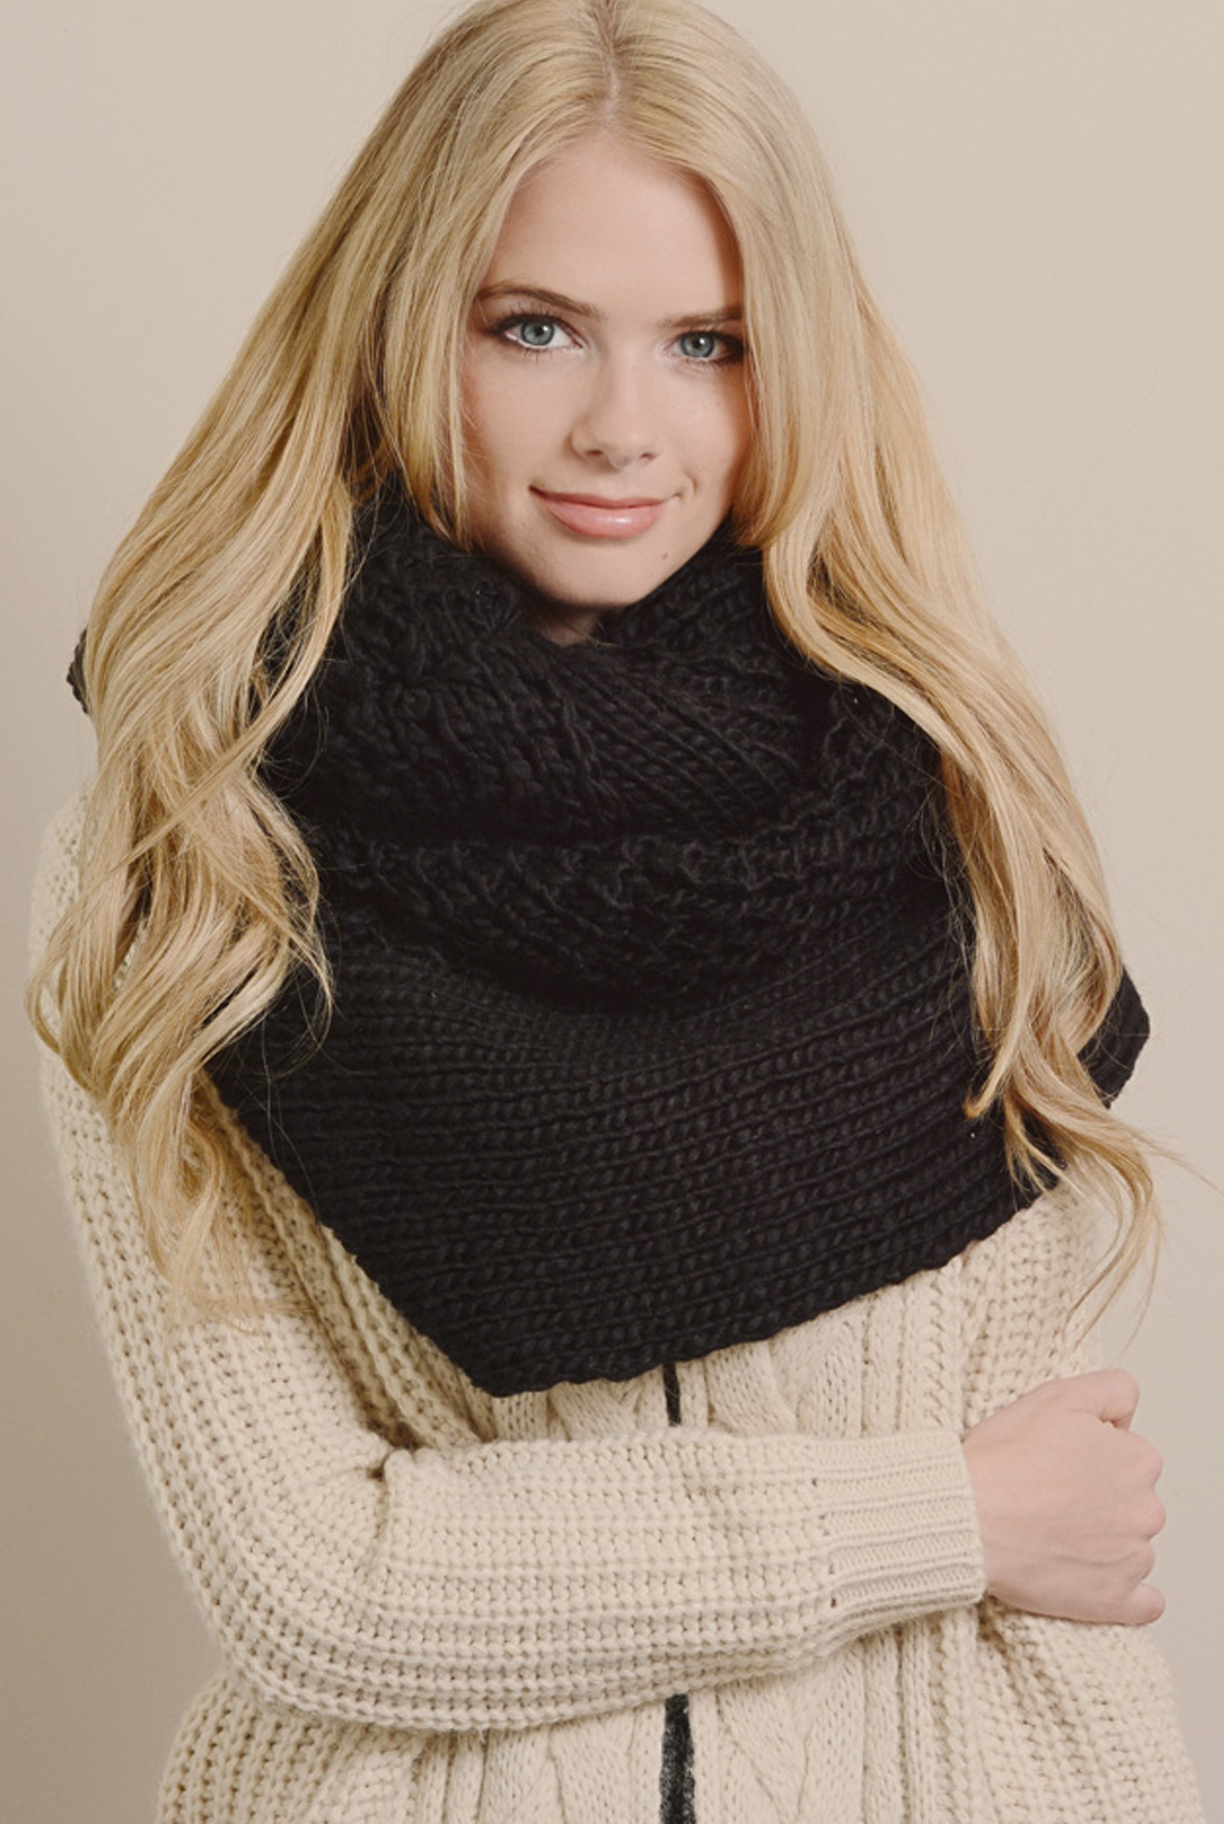 'Downtown Chicago' Infinity Scarf